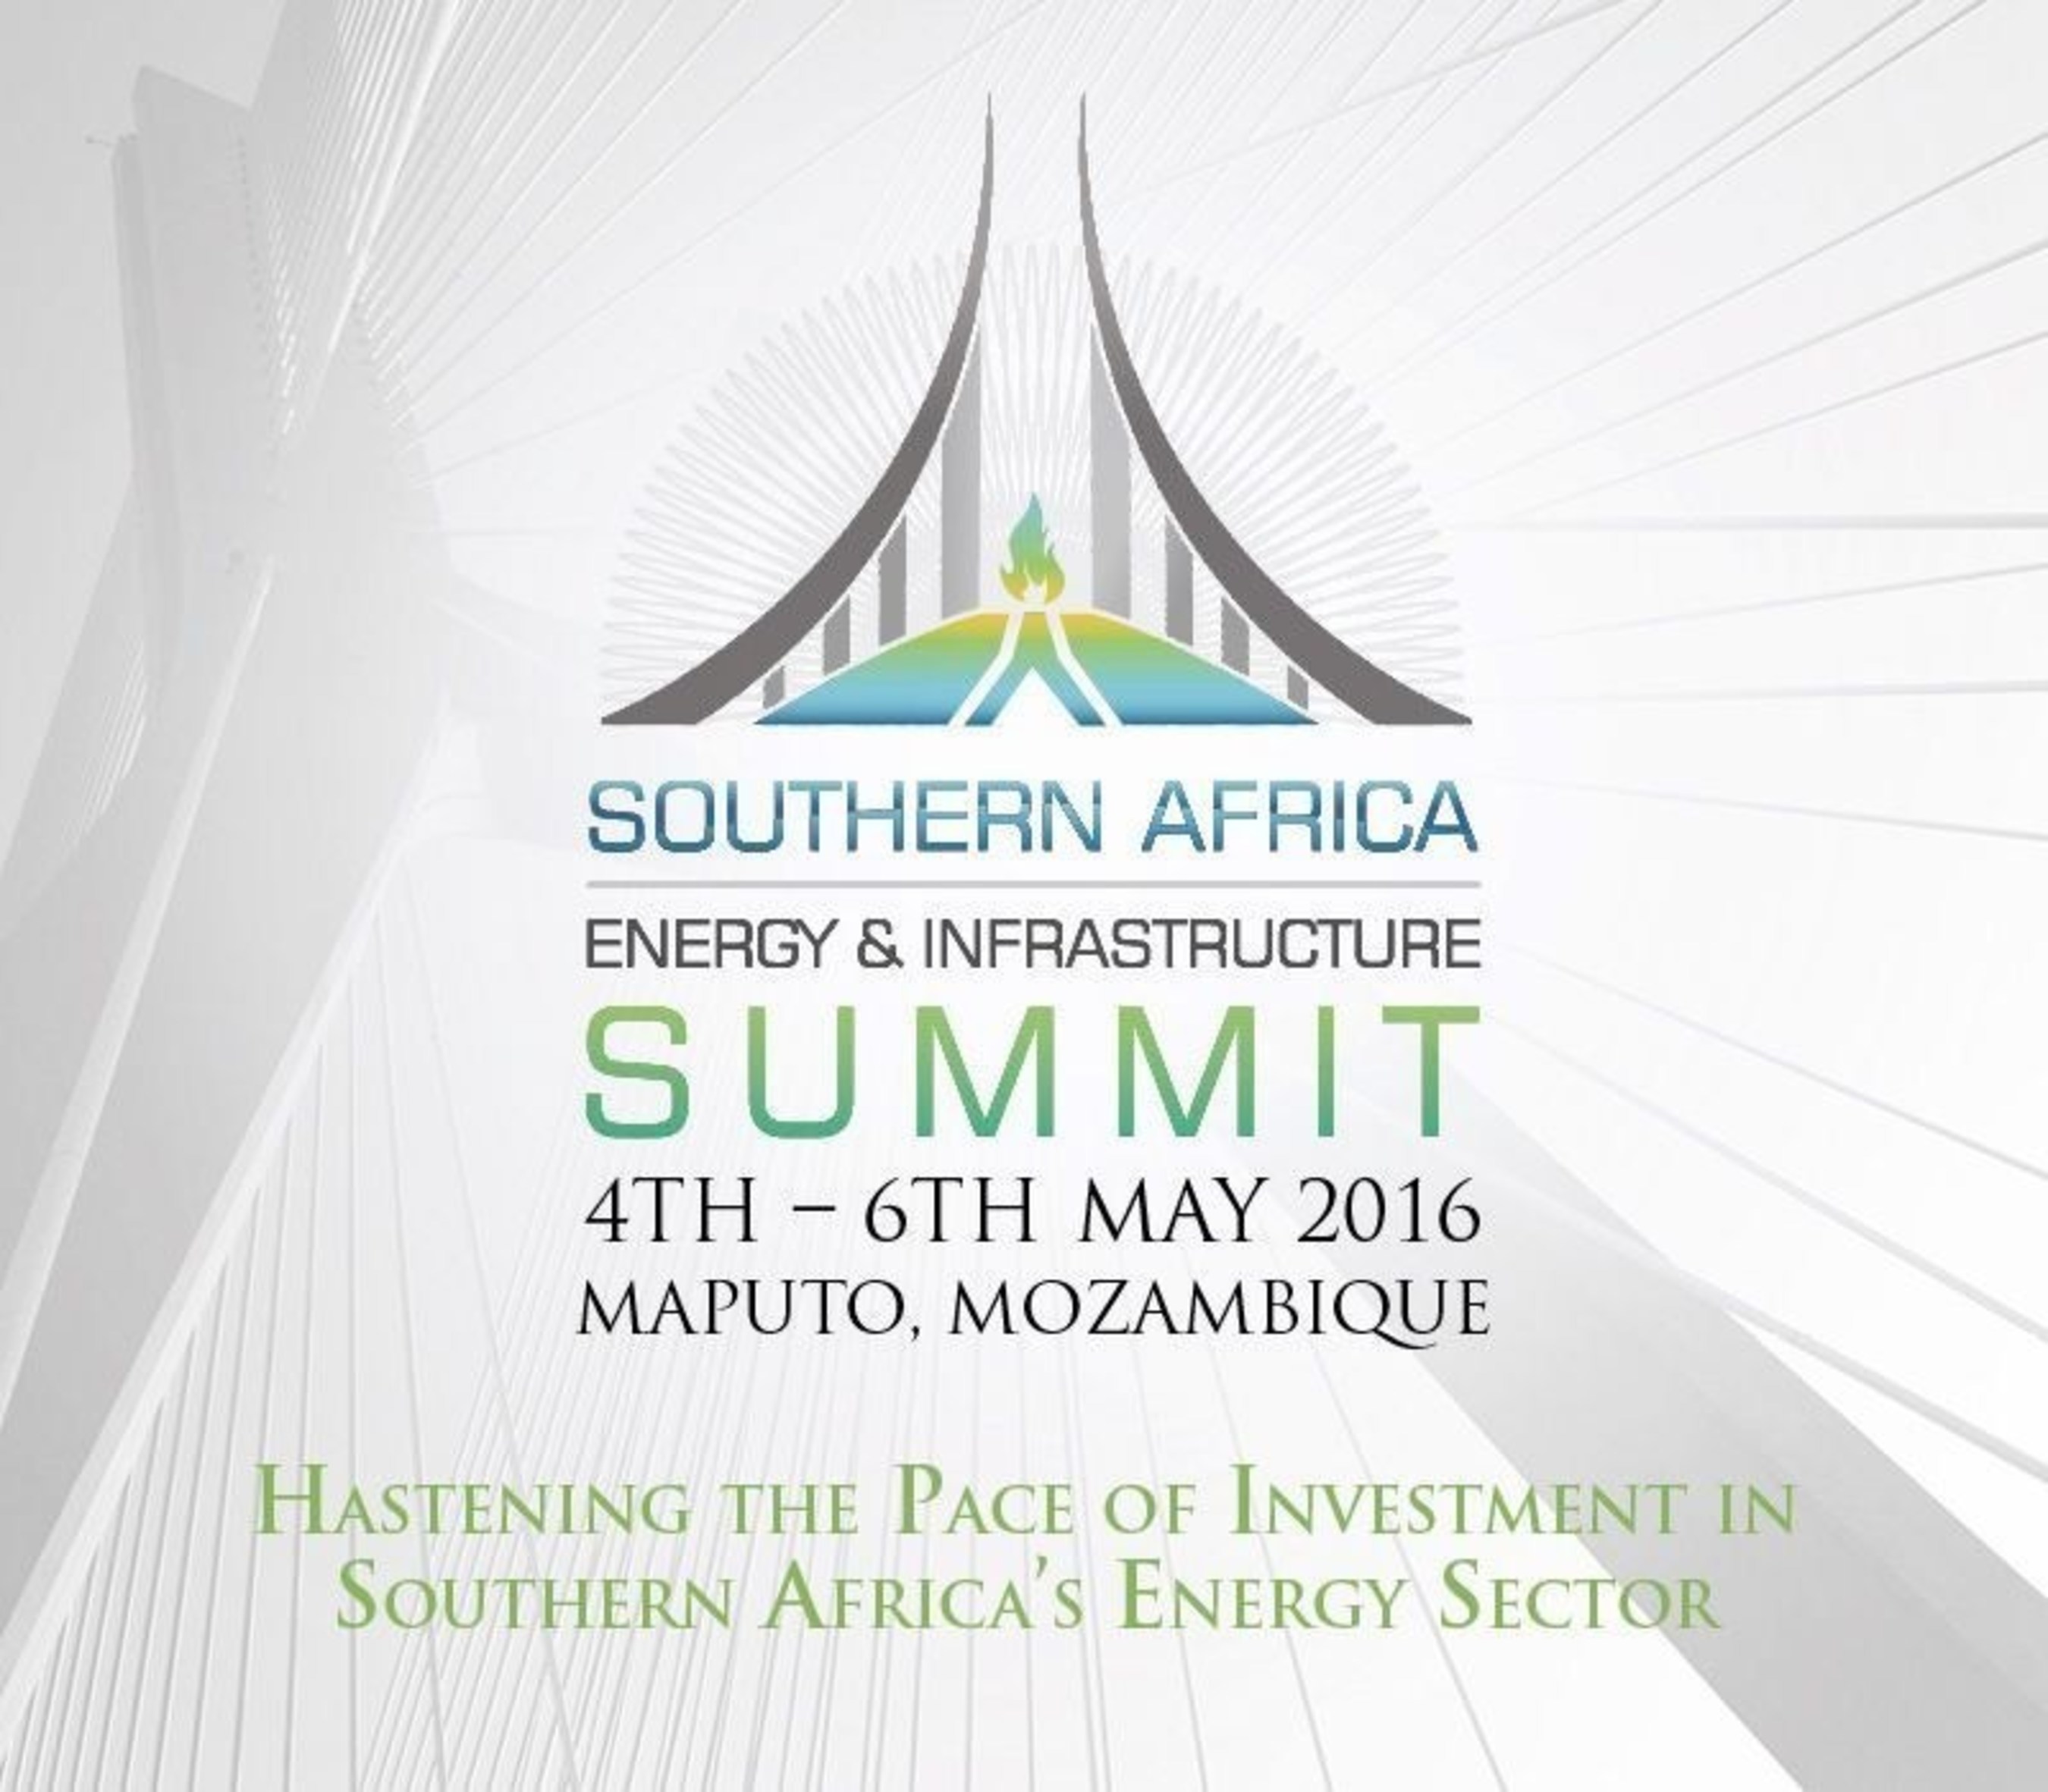 Southern Africa Energy & Infrastructure Summit (PRNewsFoto/EnergyNet Limited) (PRNewsFoto/EnergyNet Limited)